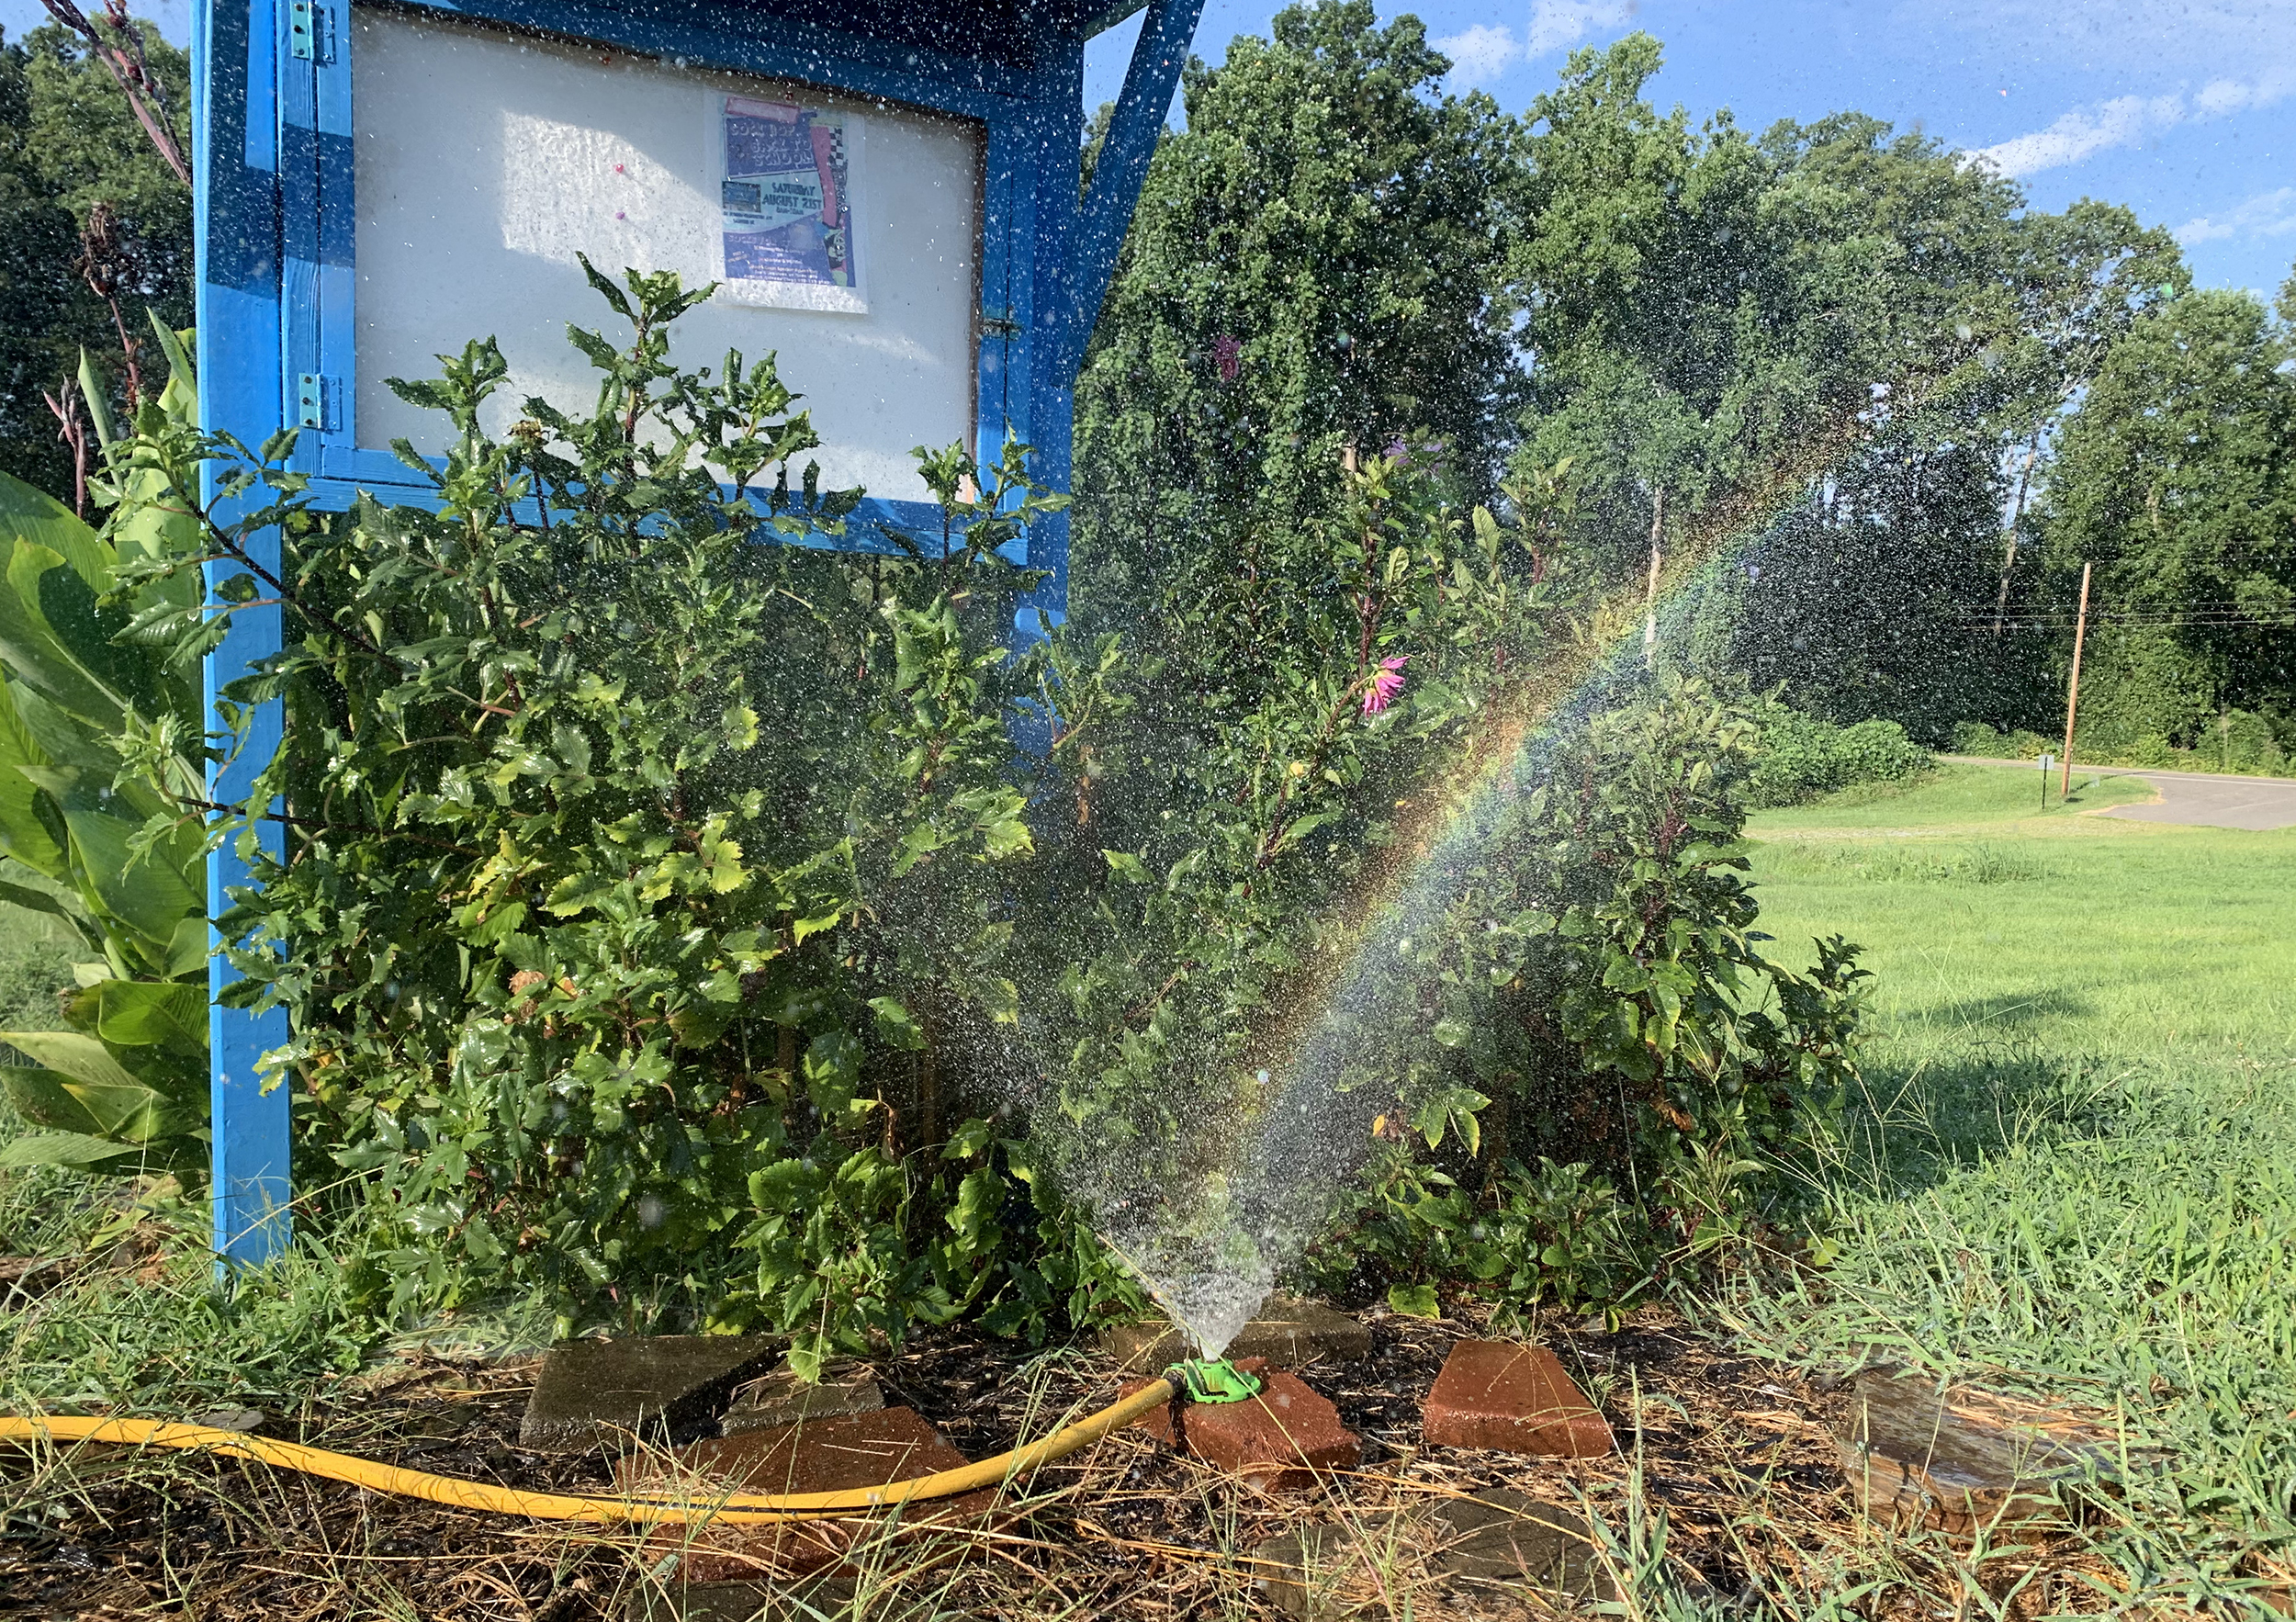 Water from a sprinkler at the entrance to the garden catches the light, creating a rainbow.